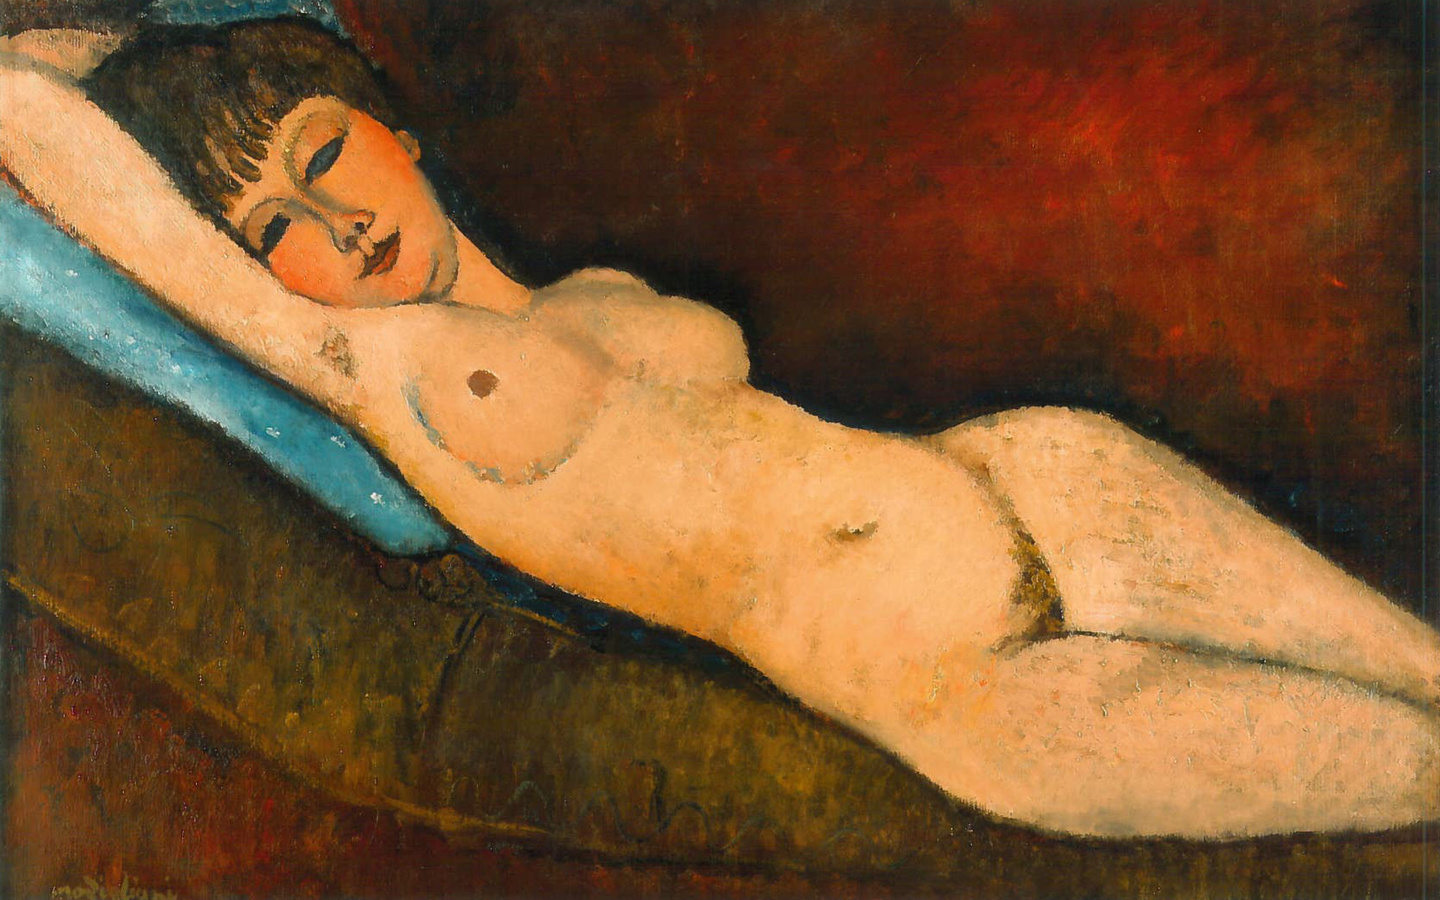 <p><strong>Reclining Nude with Blue Cushion</strong> by <em>Amedeo Mondigliani</em></p><p>$ 118 million</p>